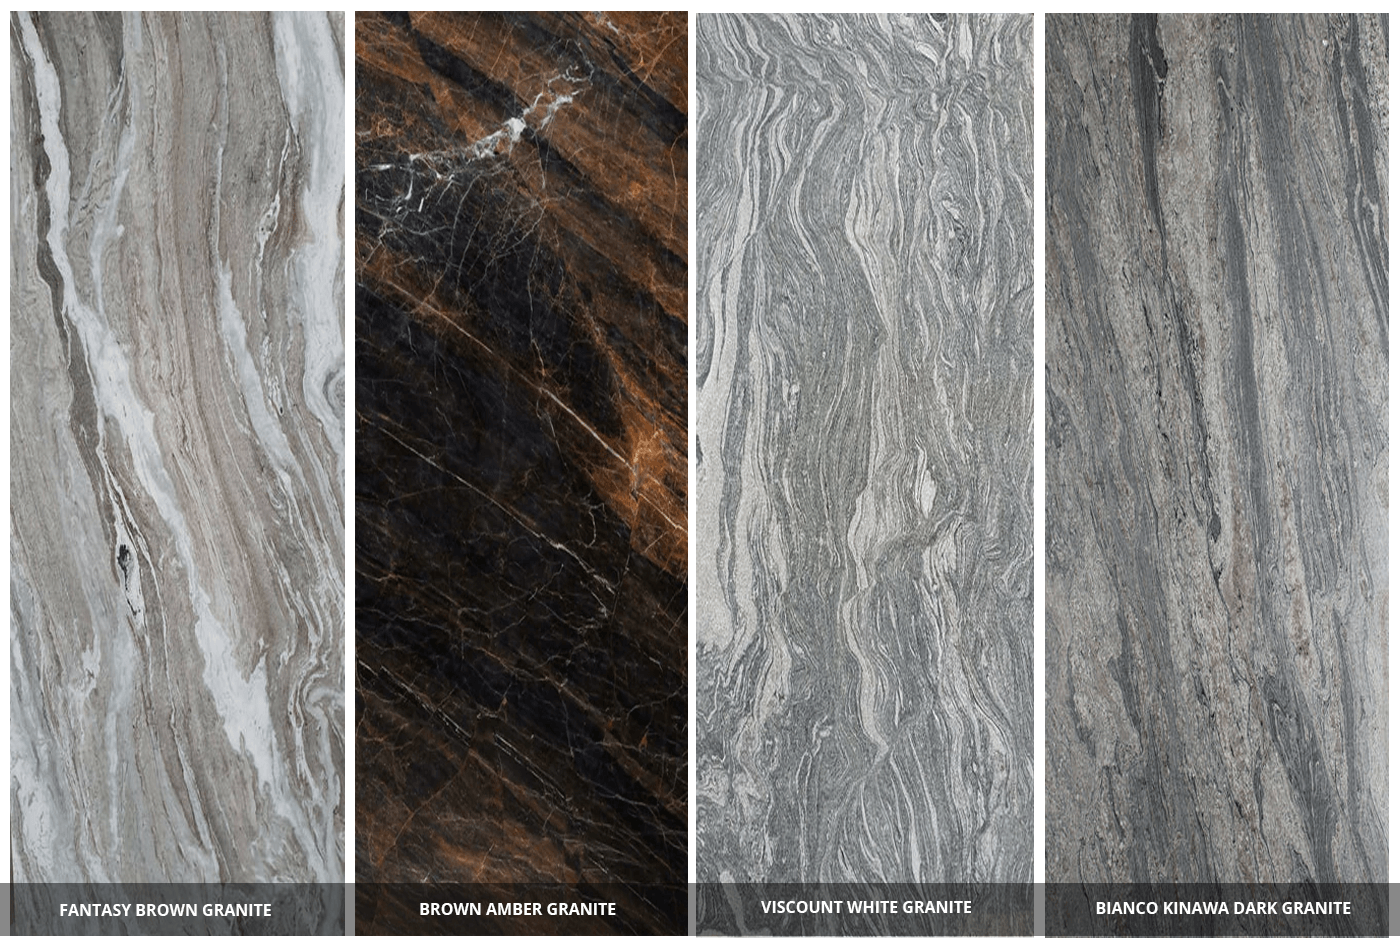 Wavy Patterned Stones for Contemporary Kitchens & Bathroom Countertops